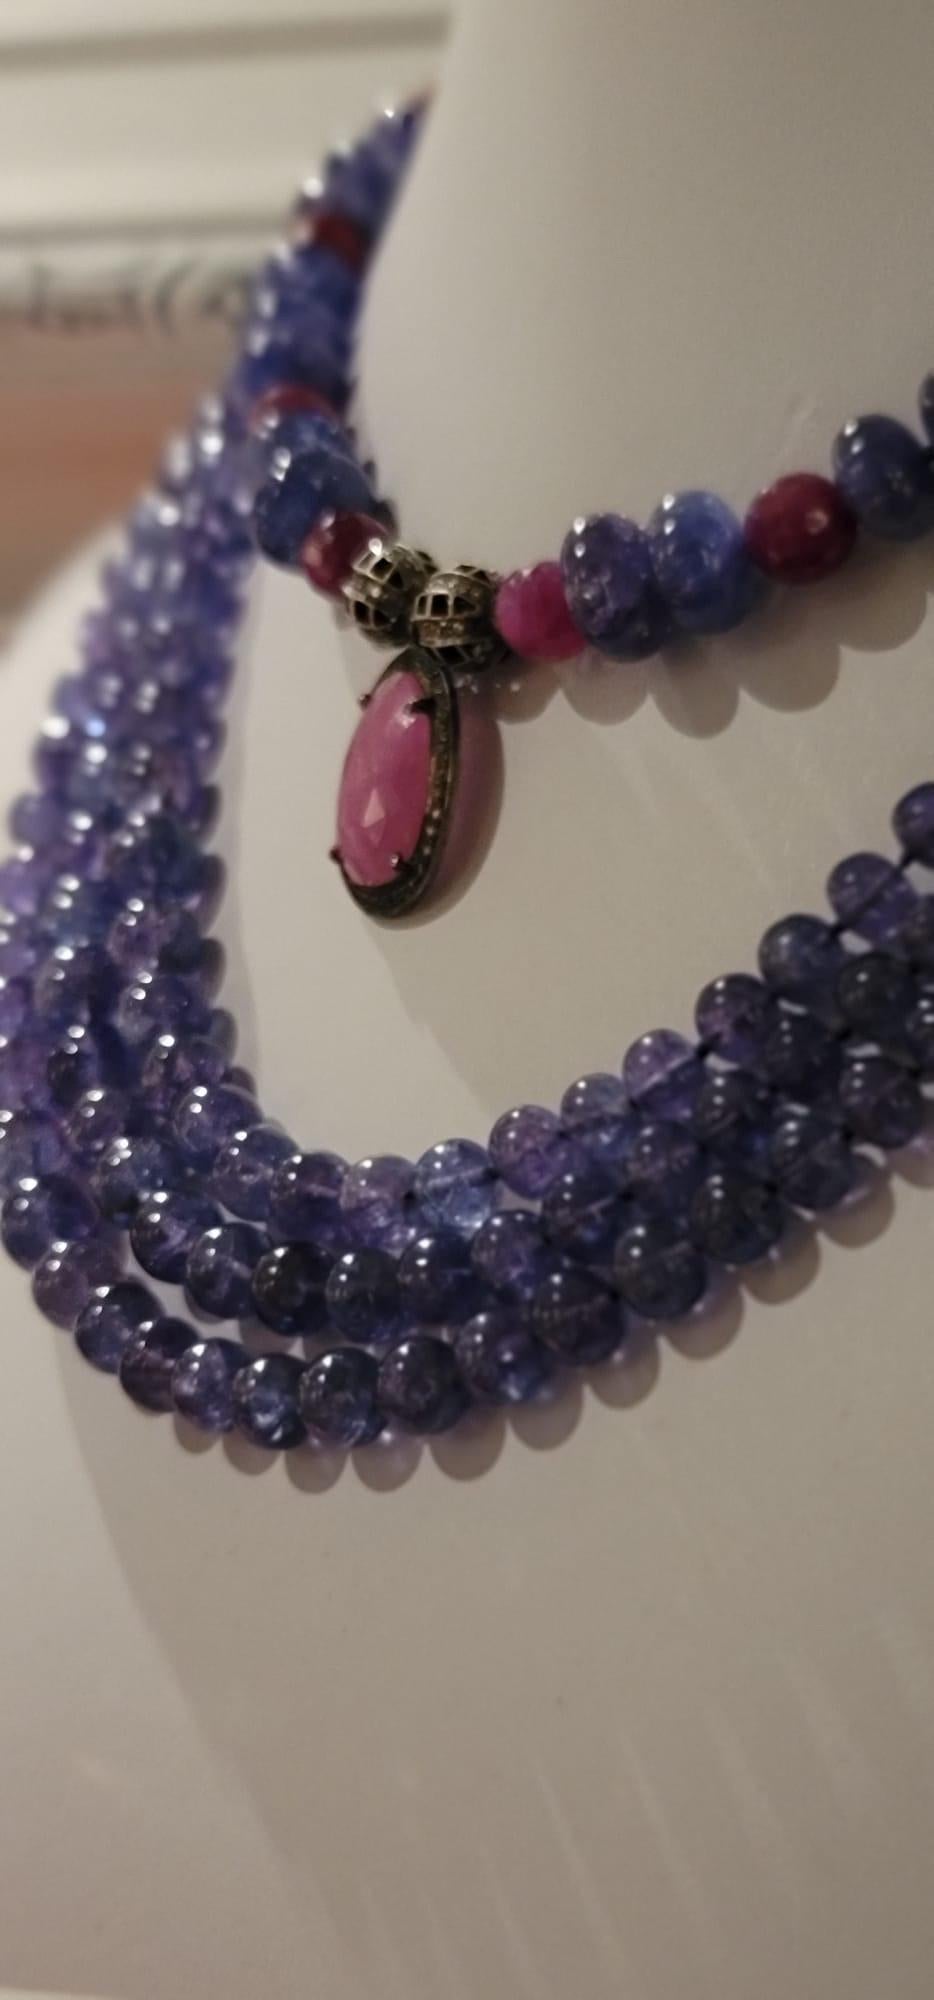 One-of-a-Kind

Tanzanite, Ruby, and diamond necklace. If not the holy trinity,close.
Polished  tanzanite alternates with radiant faceted rubies in a richly colored necklace anchored by two diamond beads that surround a diamond-encrusted faceted